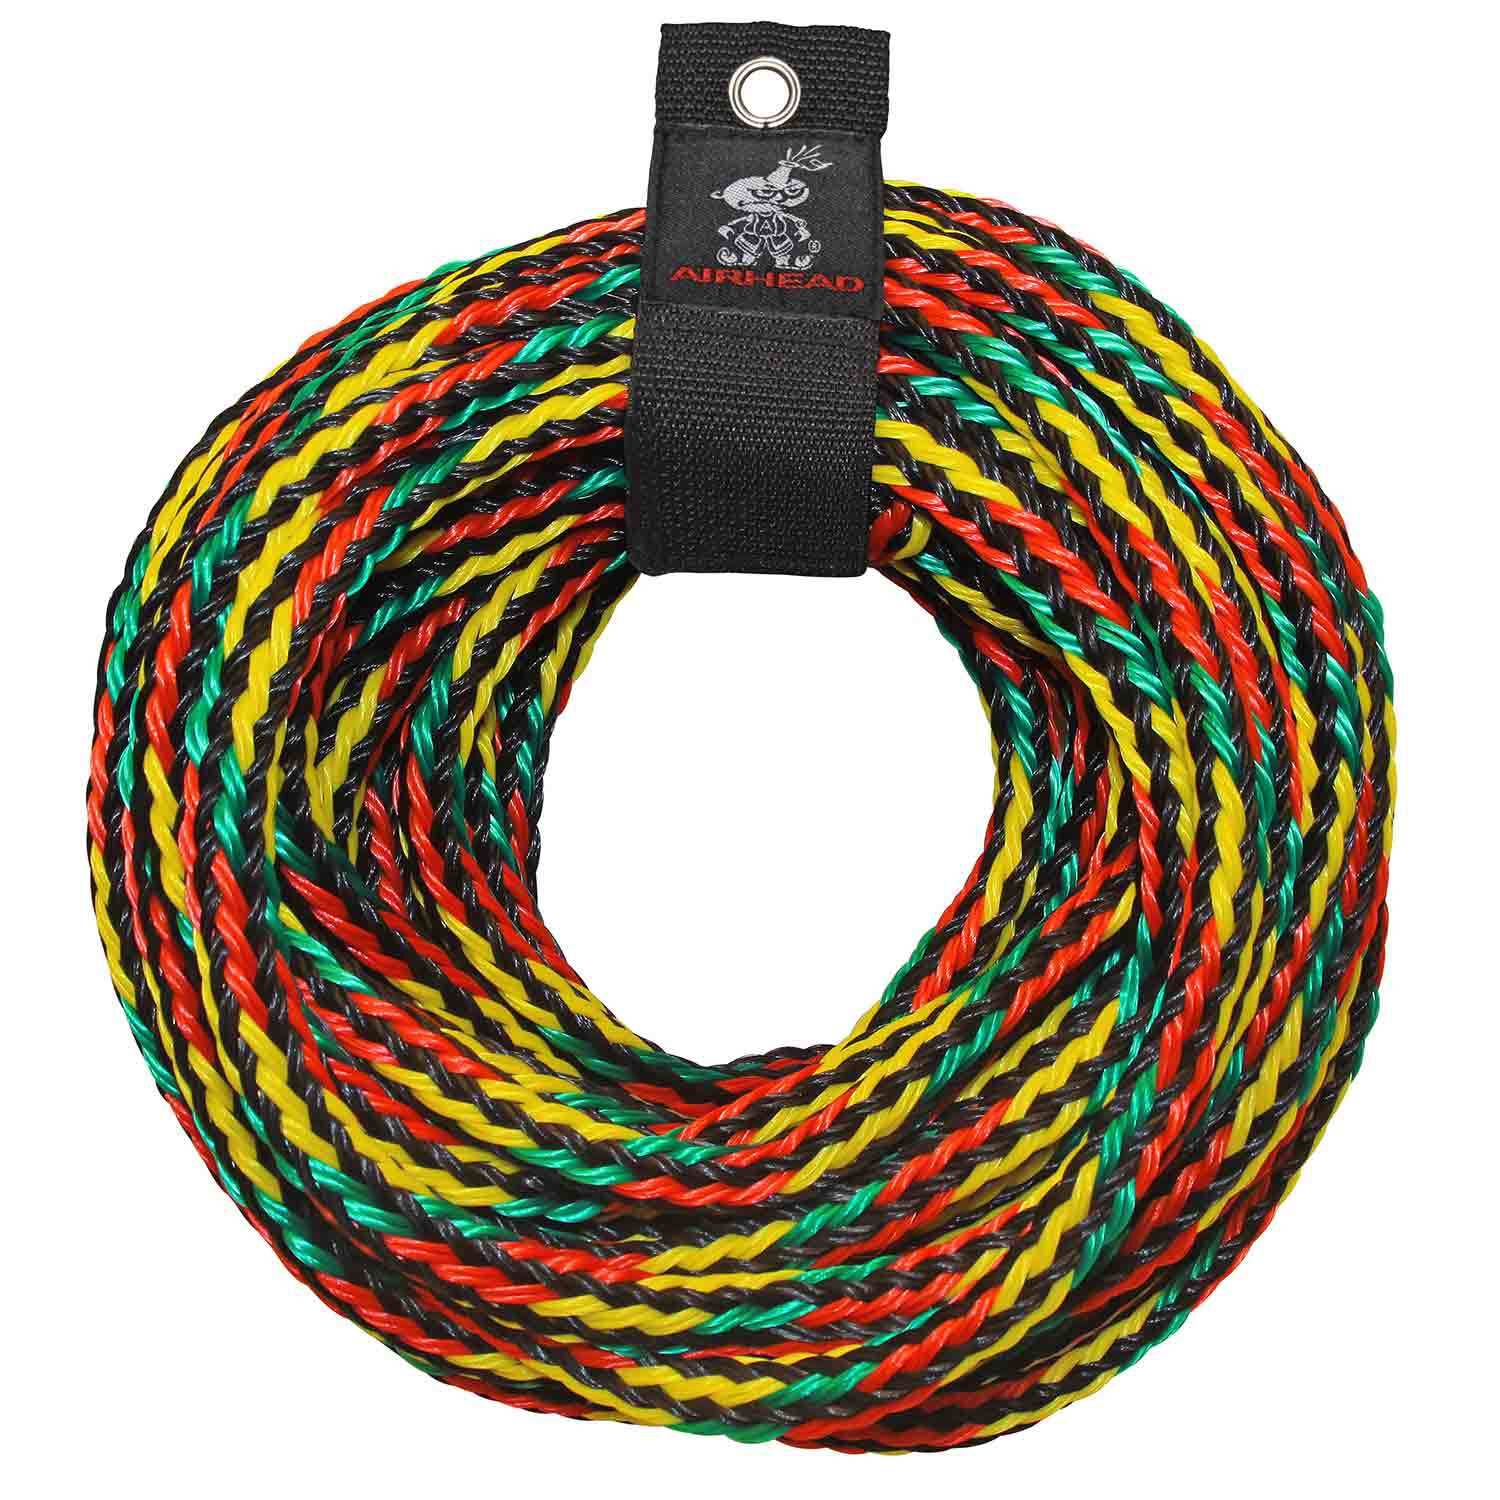 Airhead 2-Section Tow Ropes 1-4 Rider Ropes for Towable Tubes Heavy Duty 60 Feet 